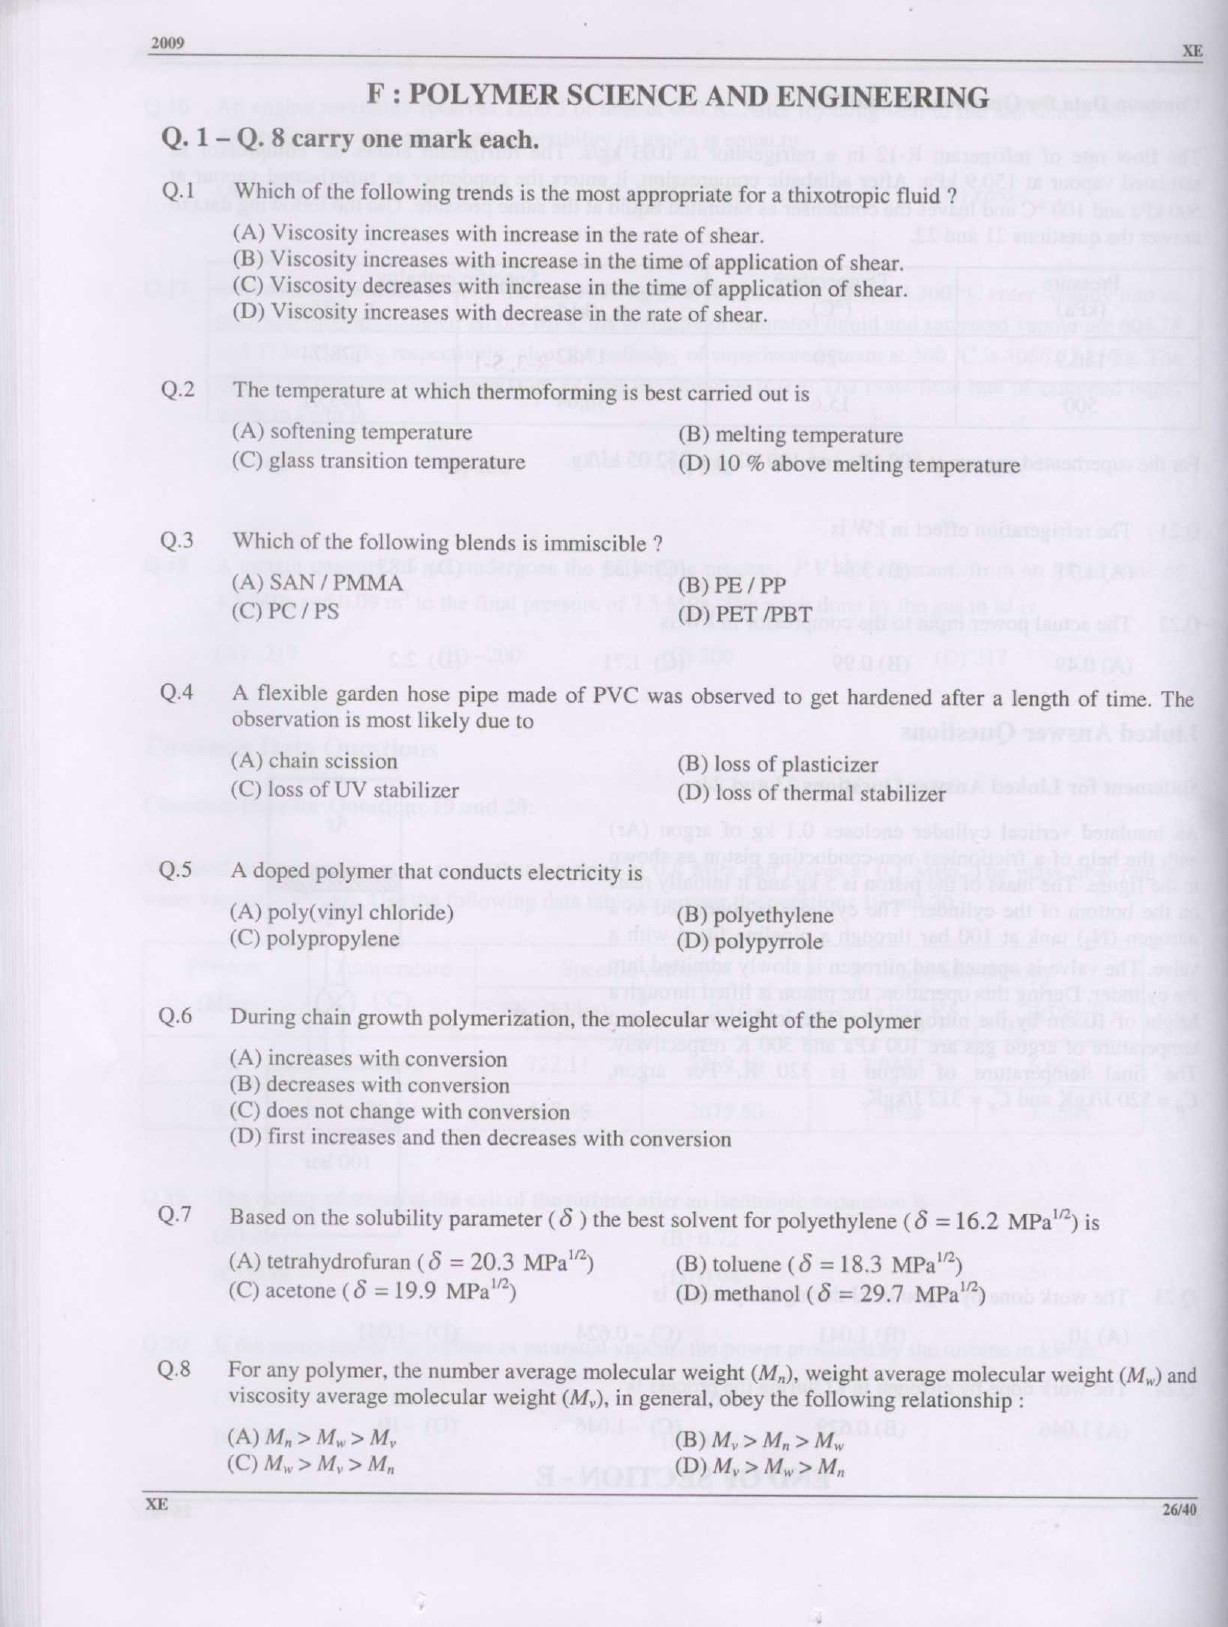 GATE Exam Question Paper 2009 Engineering Sciences 26